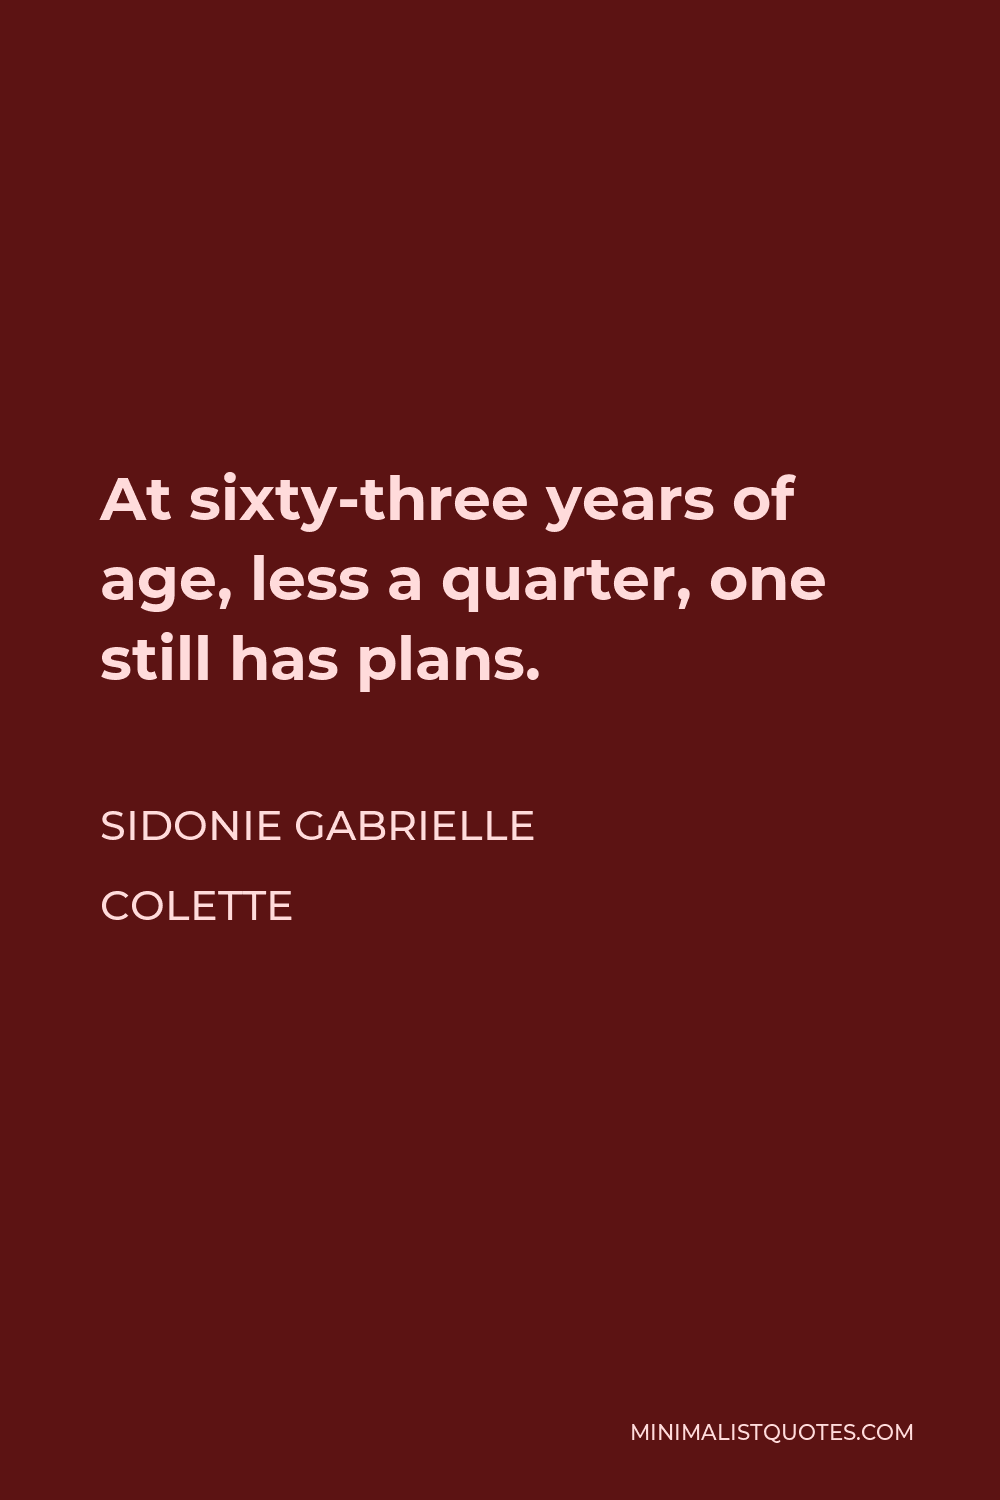 Sidonie Gabrielle Colette Quote - At sixty-three years of age, less a quarter, one still has plans.